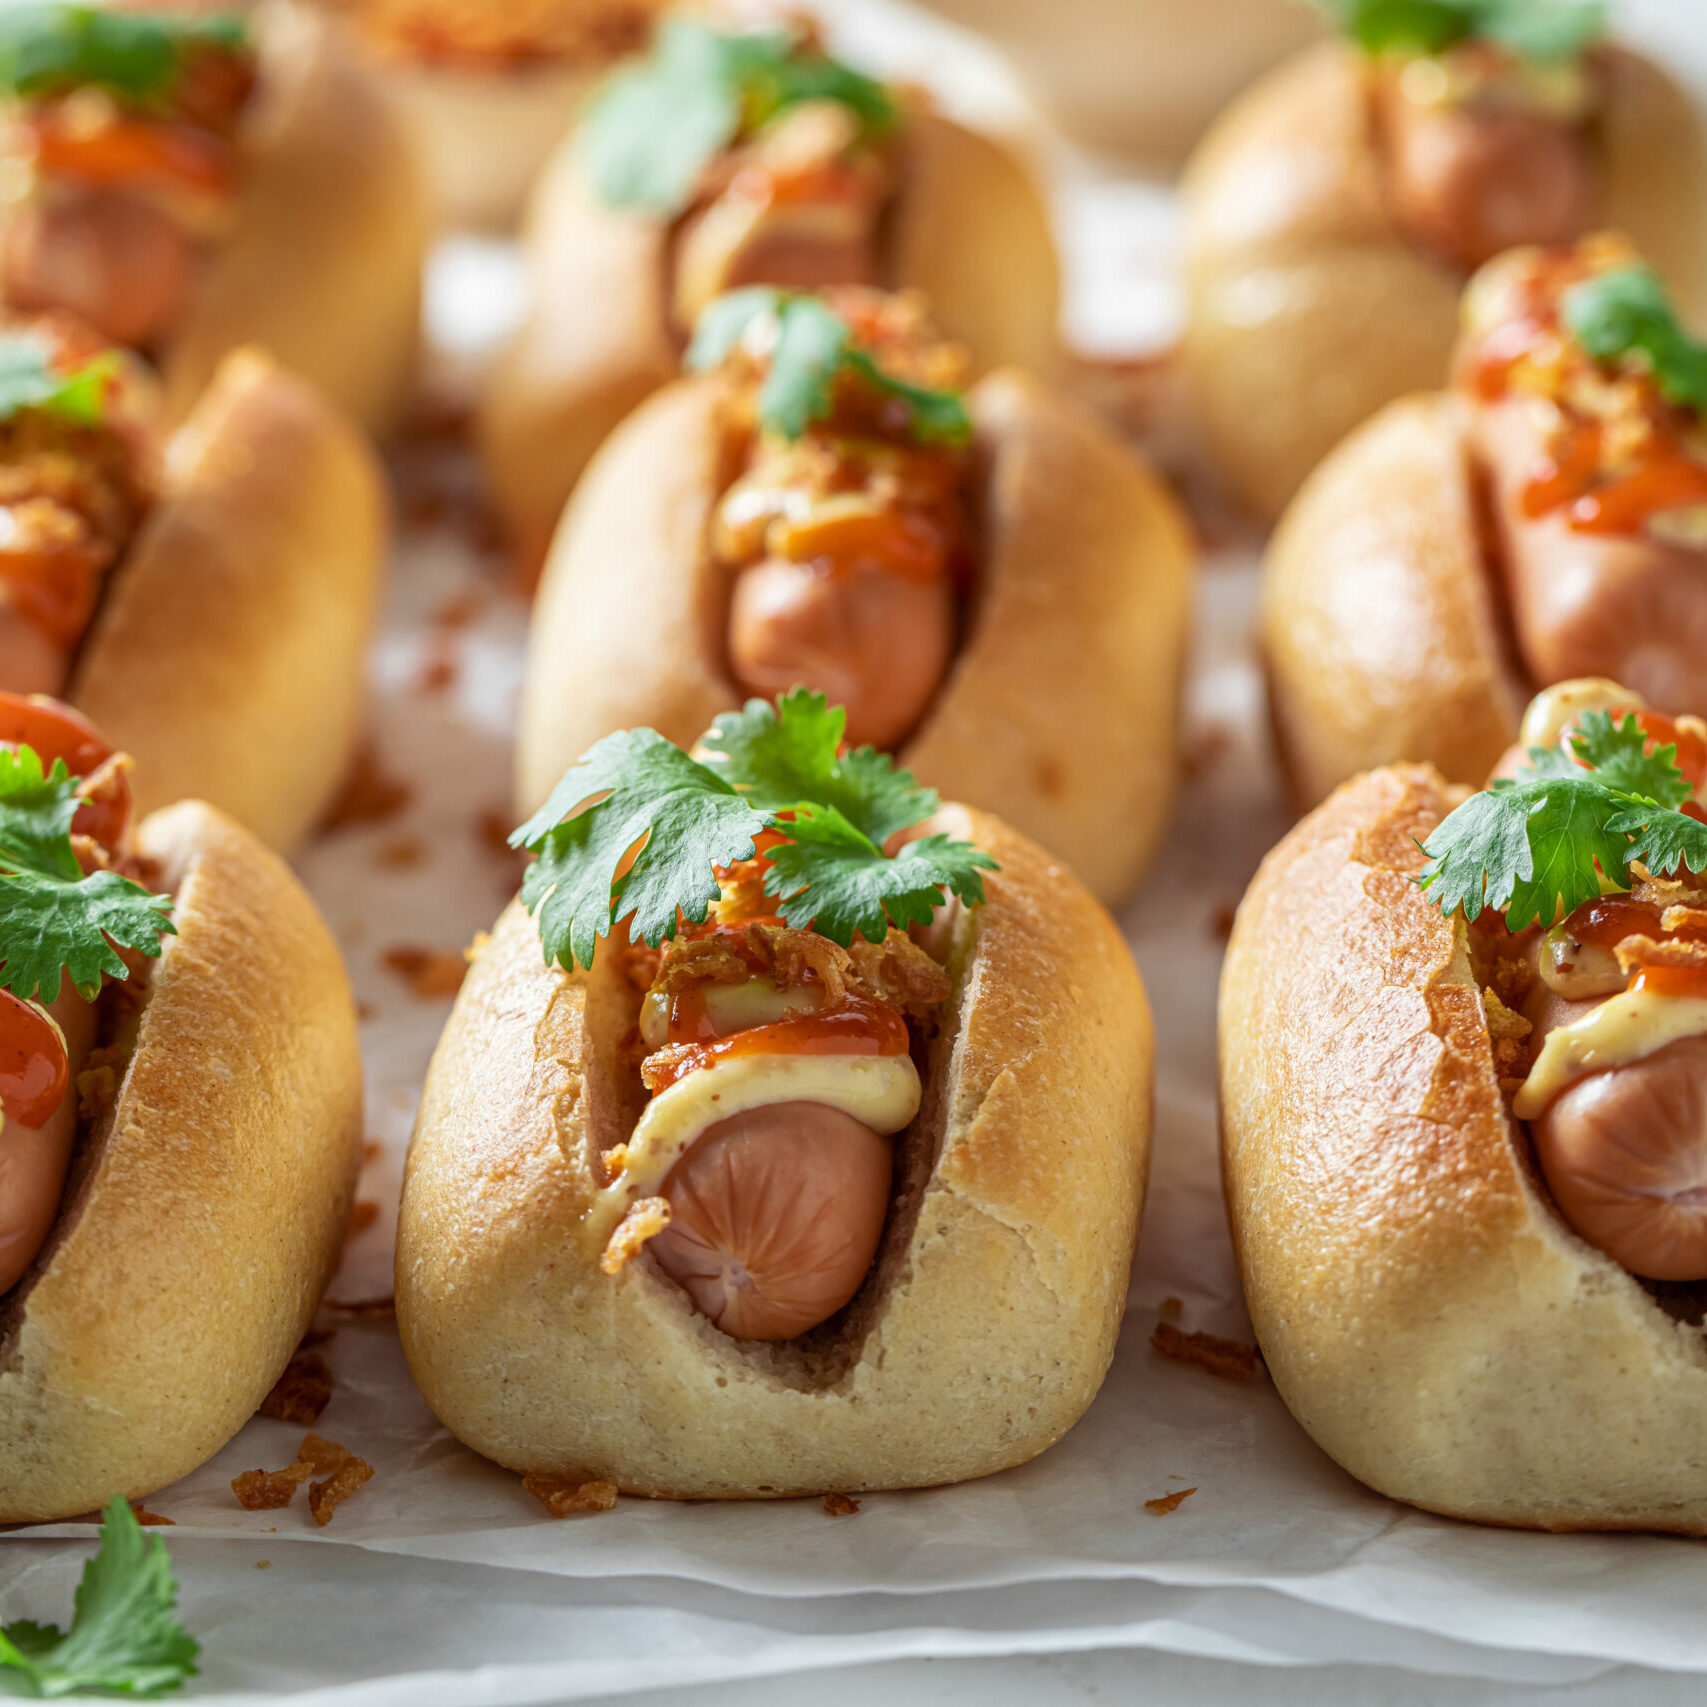 Homemade mini hot dogs as a quick appetizers